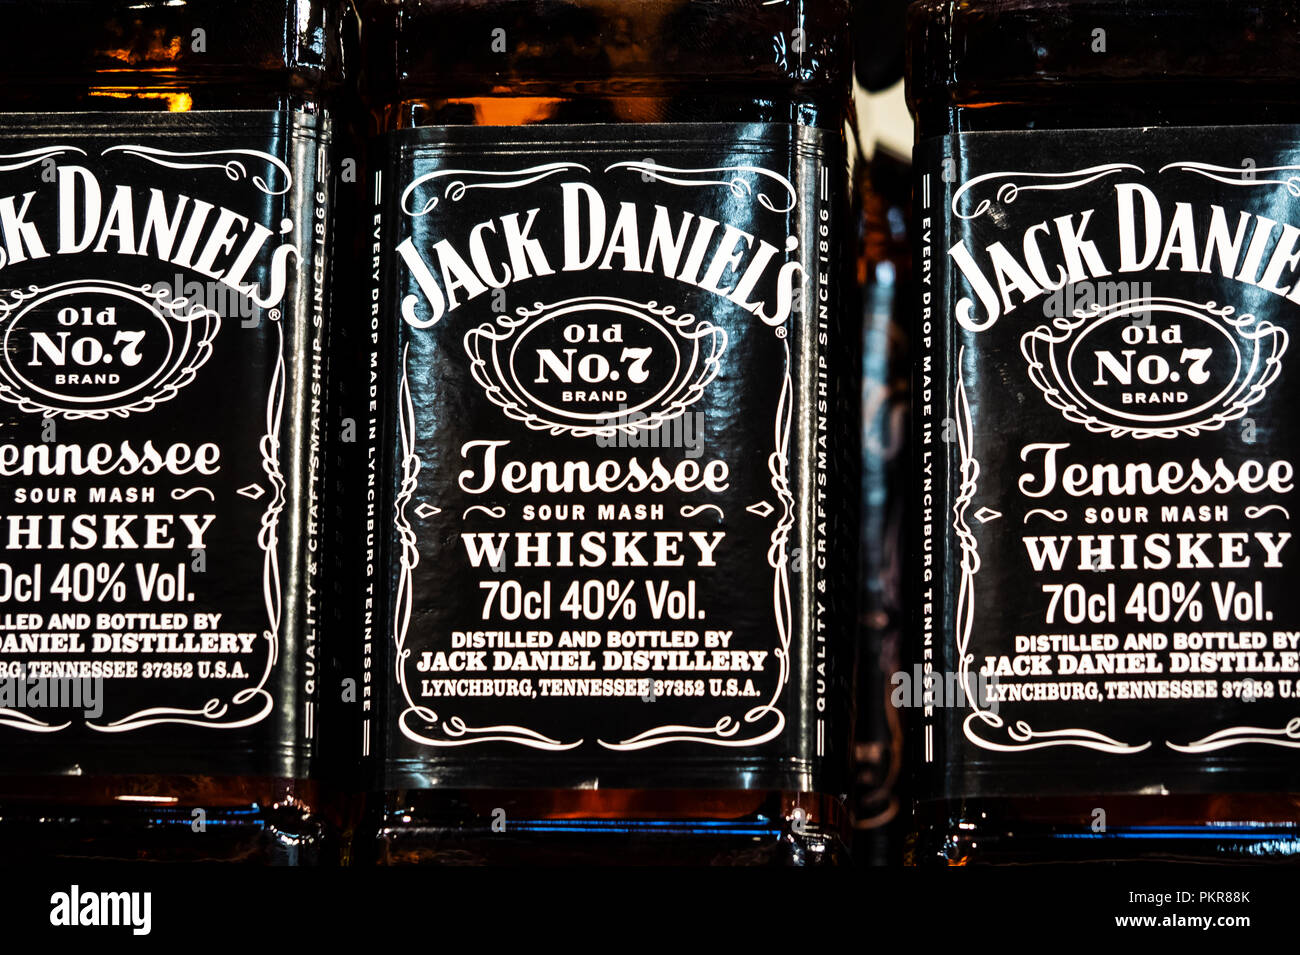 Jack Daniel S Whiskey On Store Shelf Jack Daniel S Is A Brand Of Tennessee Whiskey And The Top Selling American Whiskey In The World Stock Photo Alamy